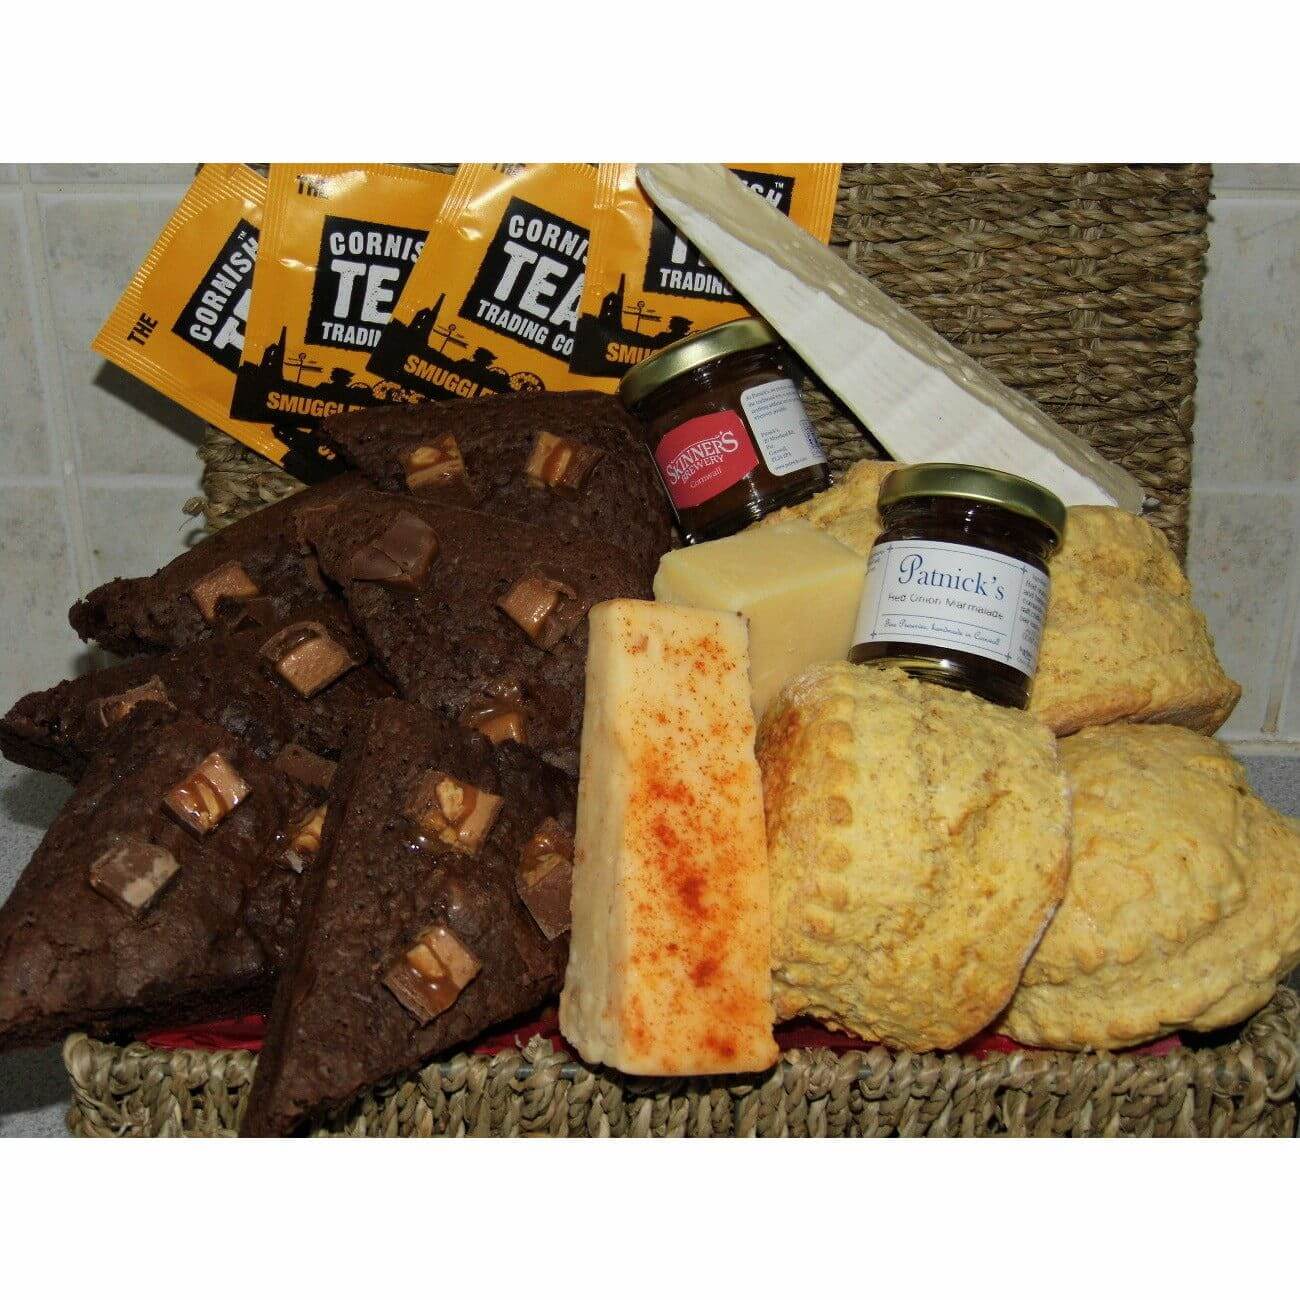 Cornish Savoury and Sweet Variety Hamper with a savoury afternoon tea for 2 and 6 brownies - The Cornish Scone Company